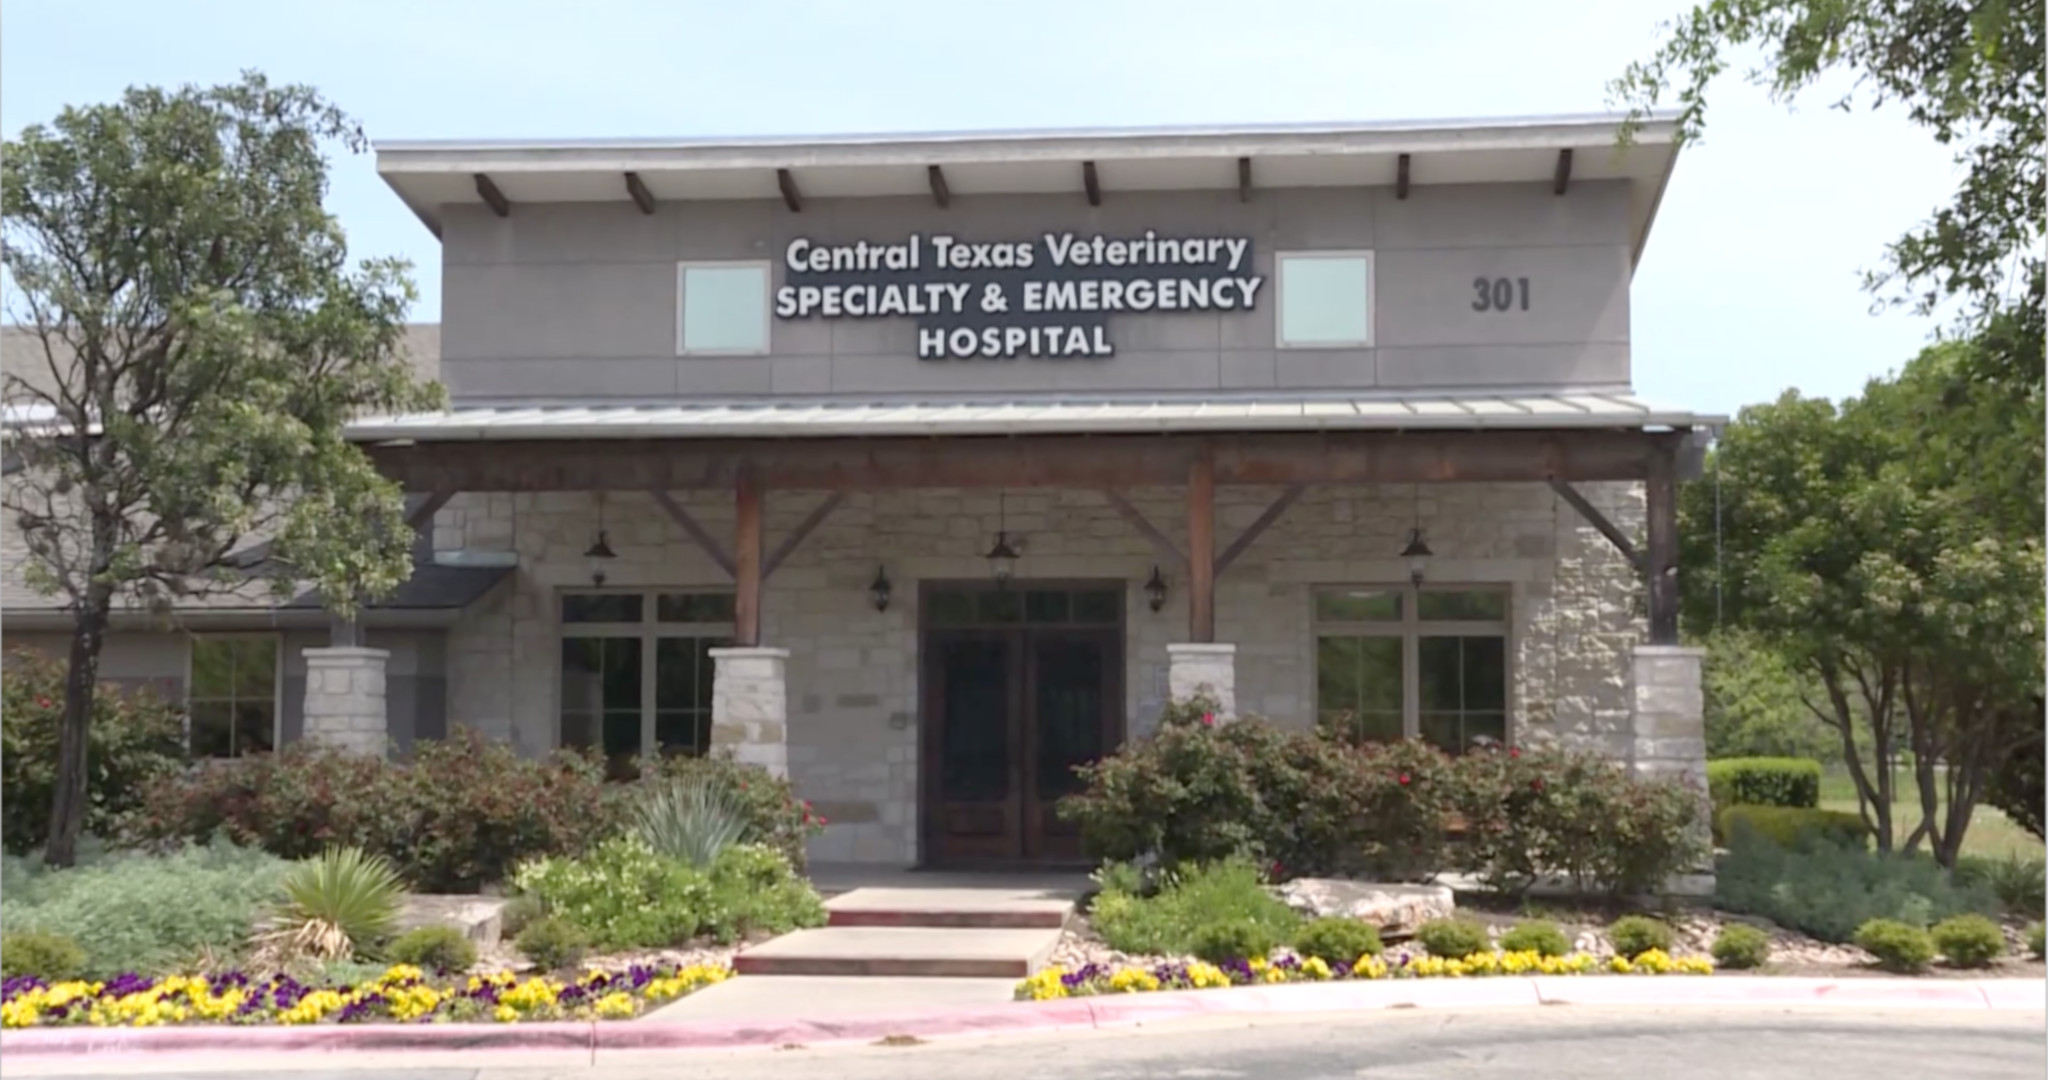 Top Rated Local Veterinarians Central Texas Veterinary Specialty Emergency Hospital